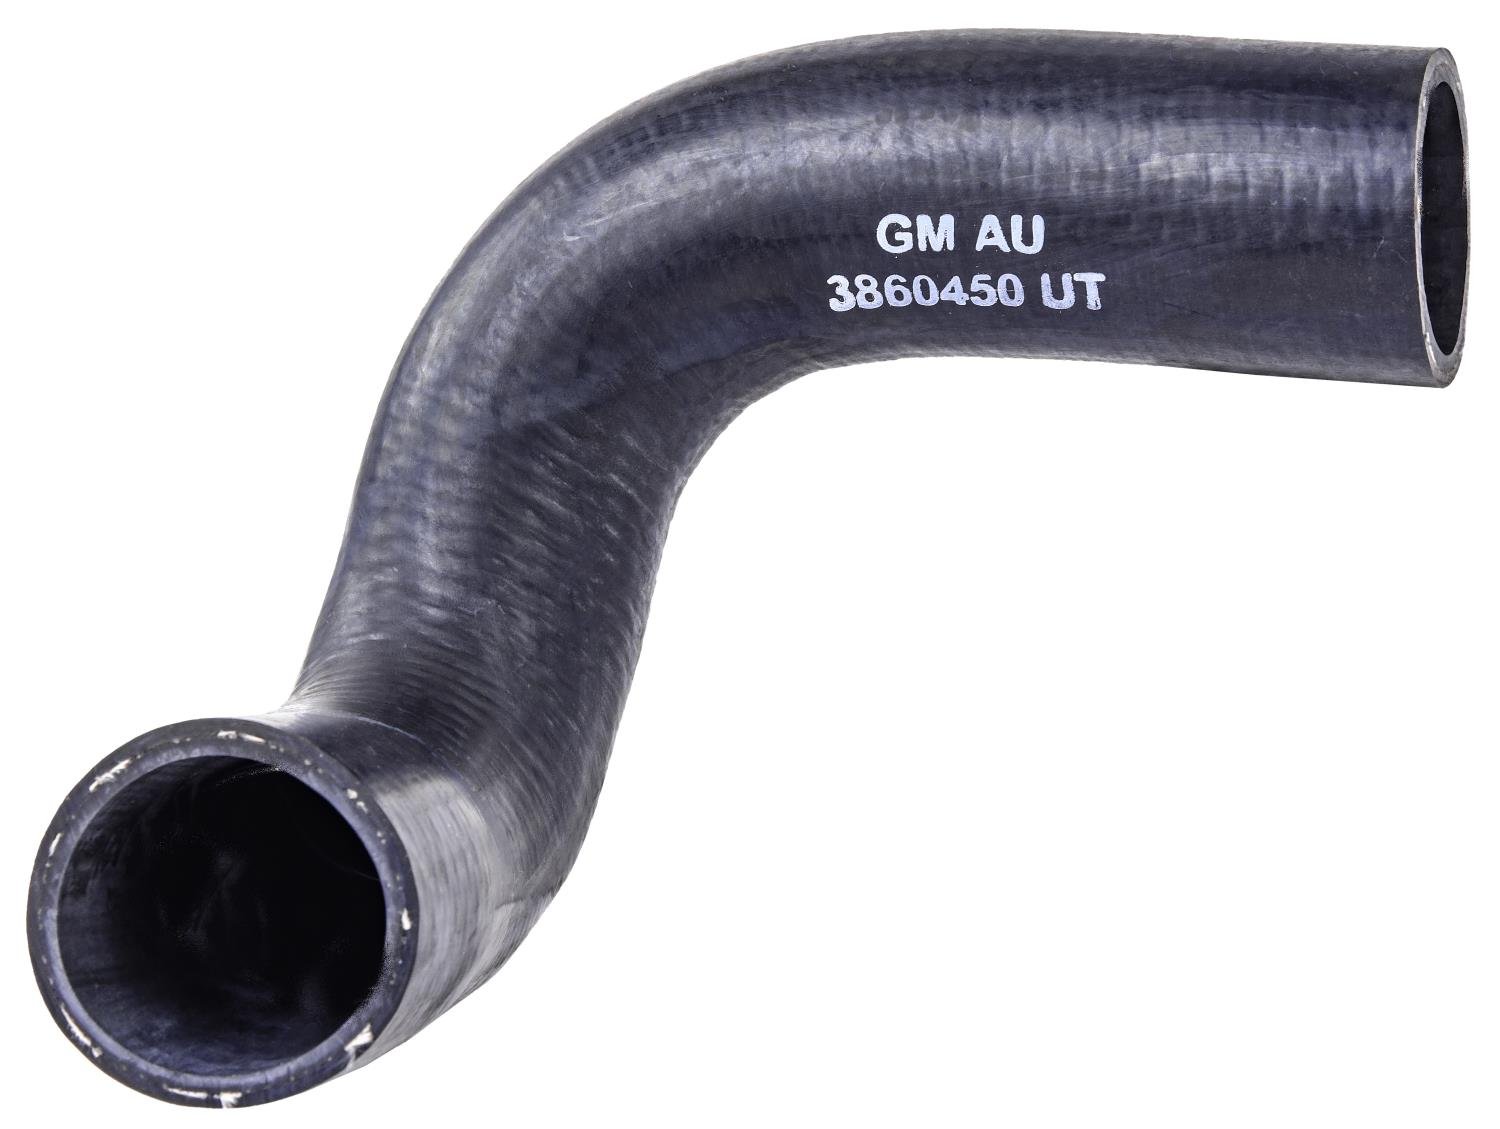 Lower Radiator Hose for 1965 Chevrolet Fullsize [Direct-Fit Replacement for GM 3860450]